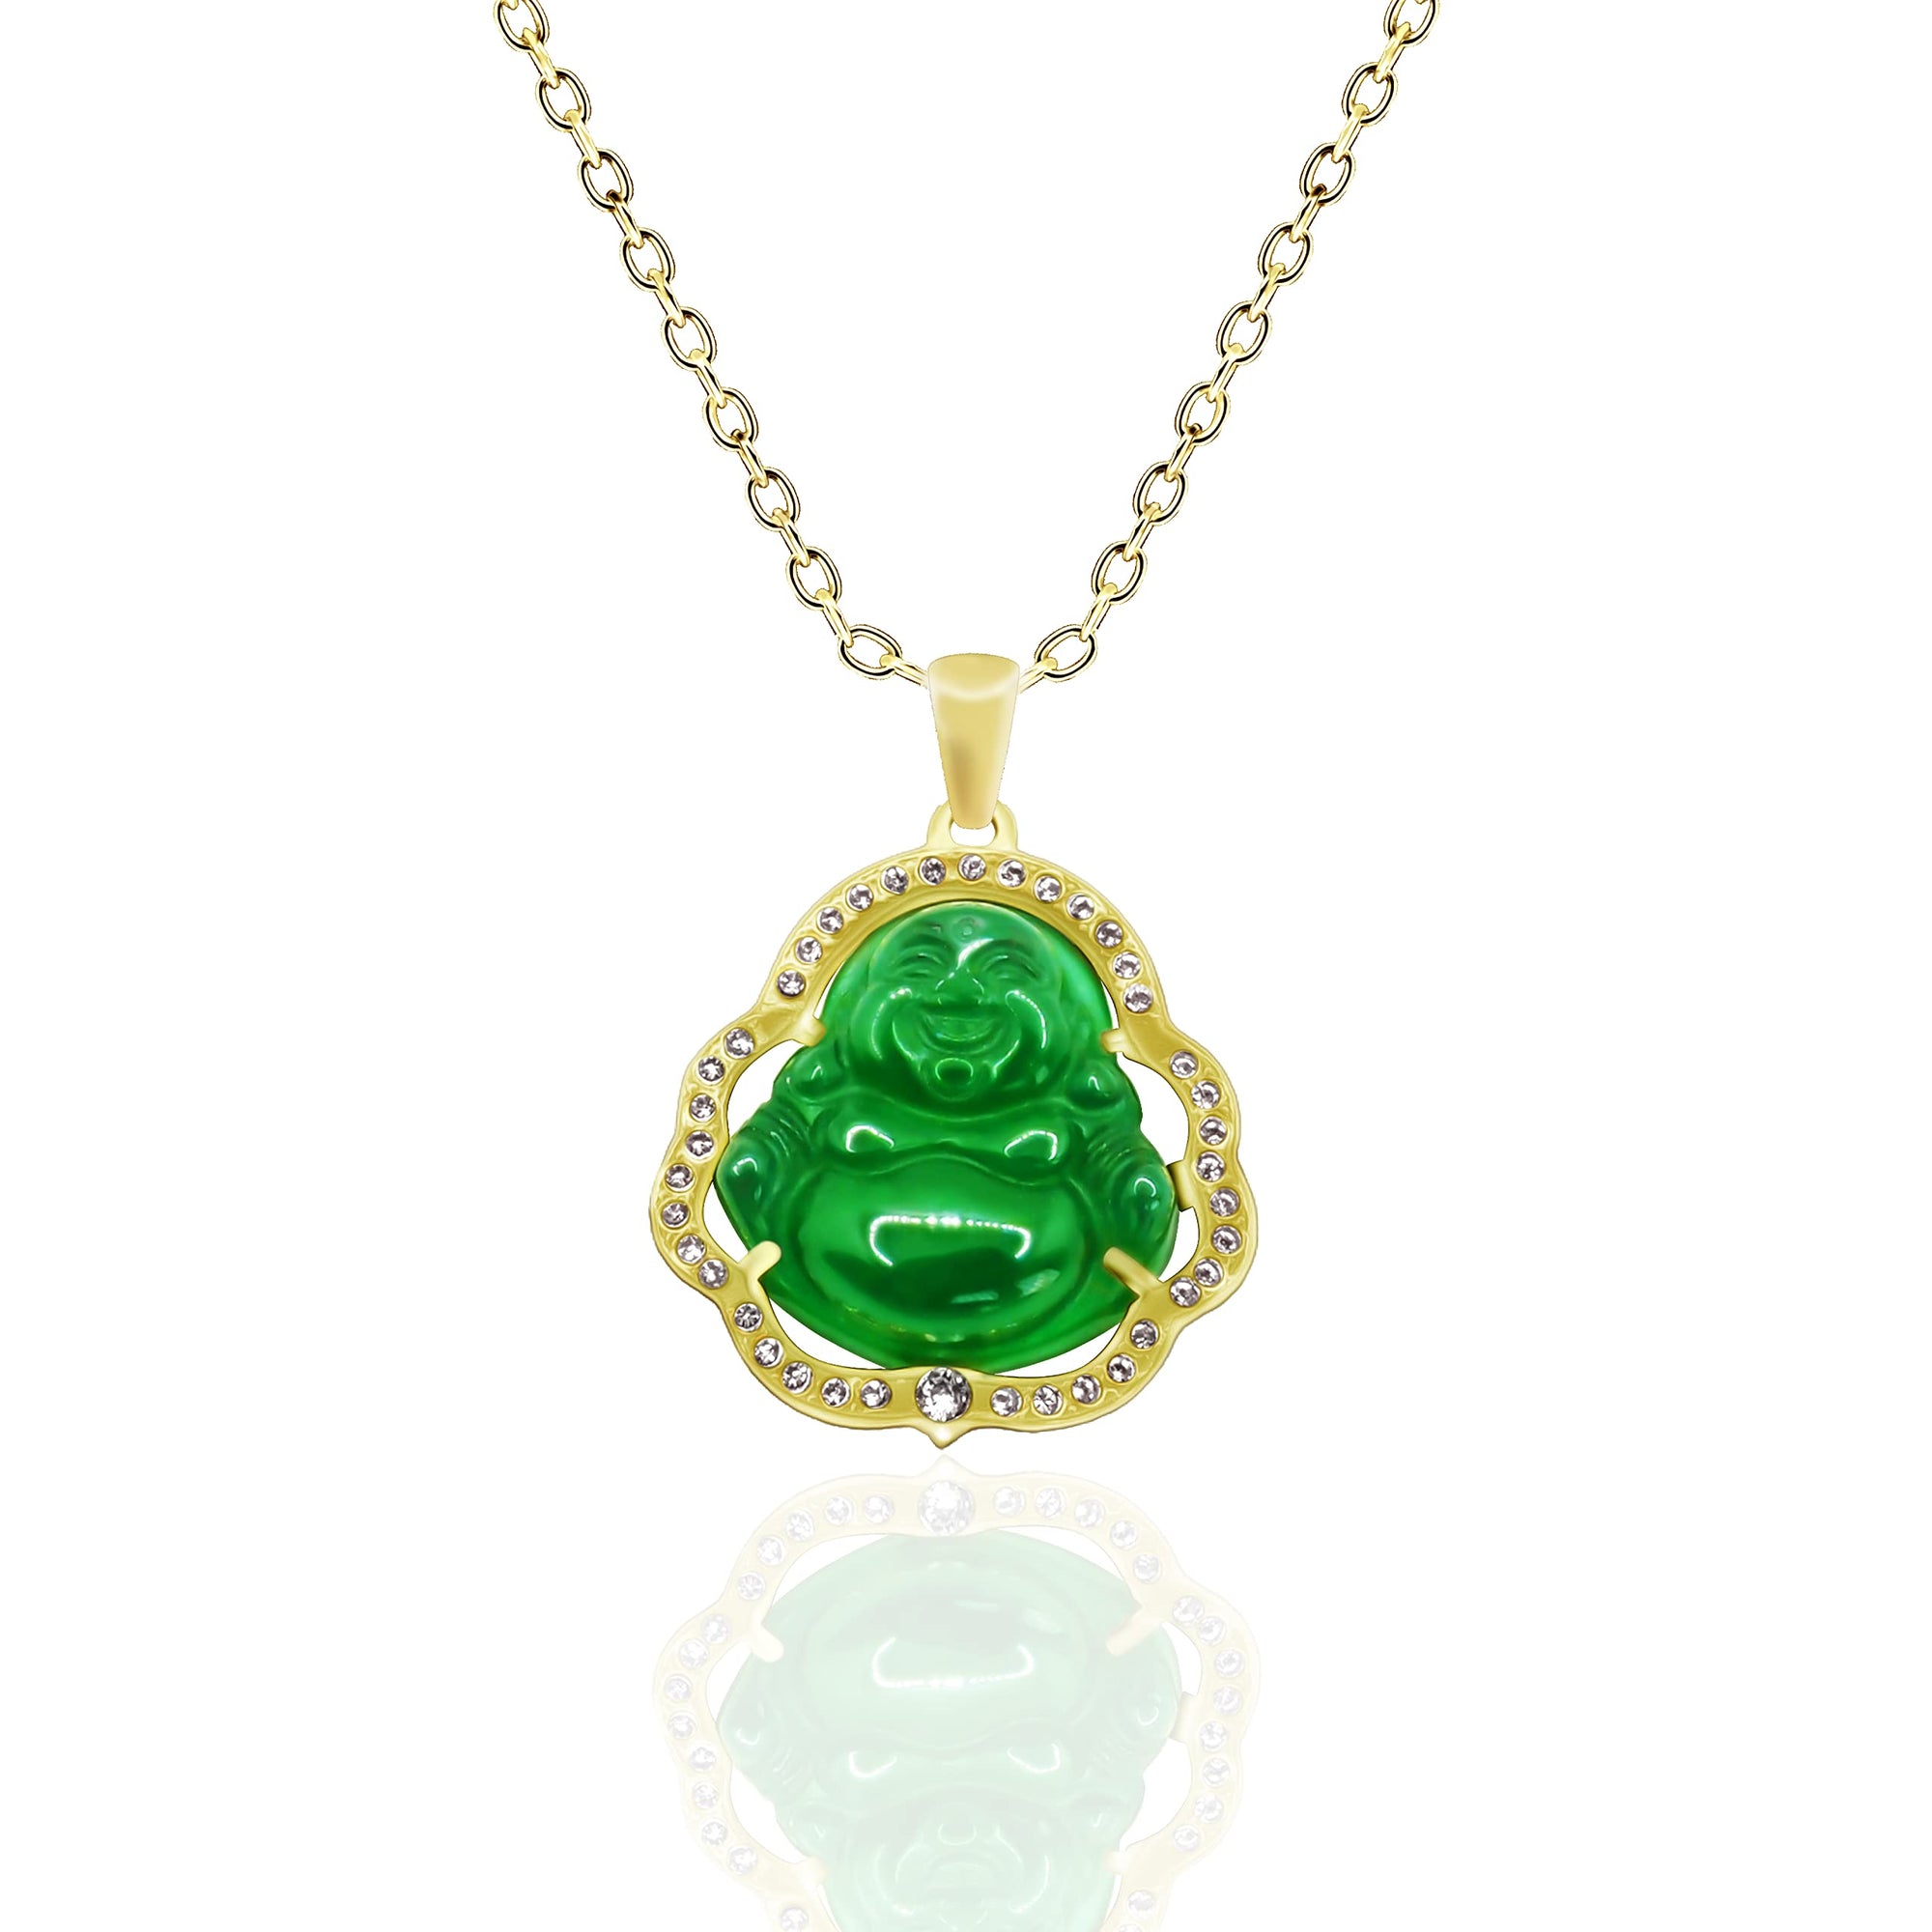 Buddha Jade Buddha Necklace Green Carved Long Beads Chain Pendant For Women  And Men Lucky Amulet Jewelry Gift For Buddhism From Vivian5168, $1.76 |  DHgate.Com